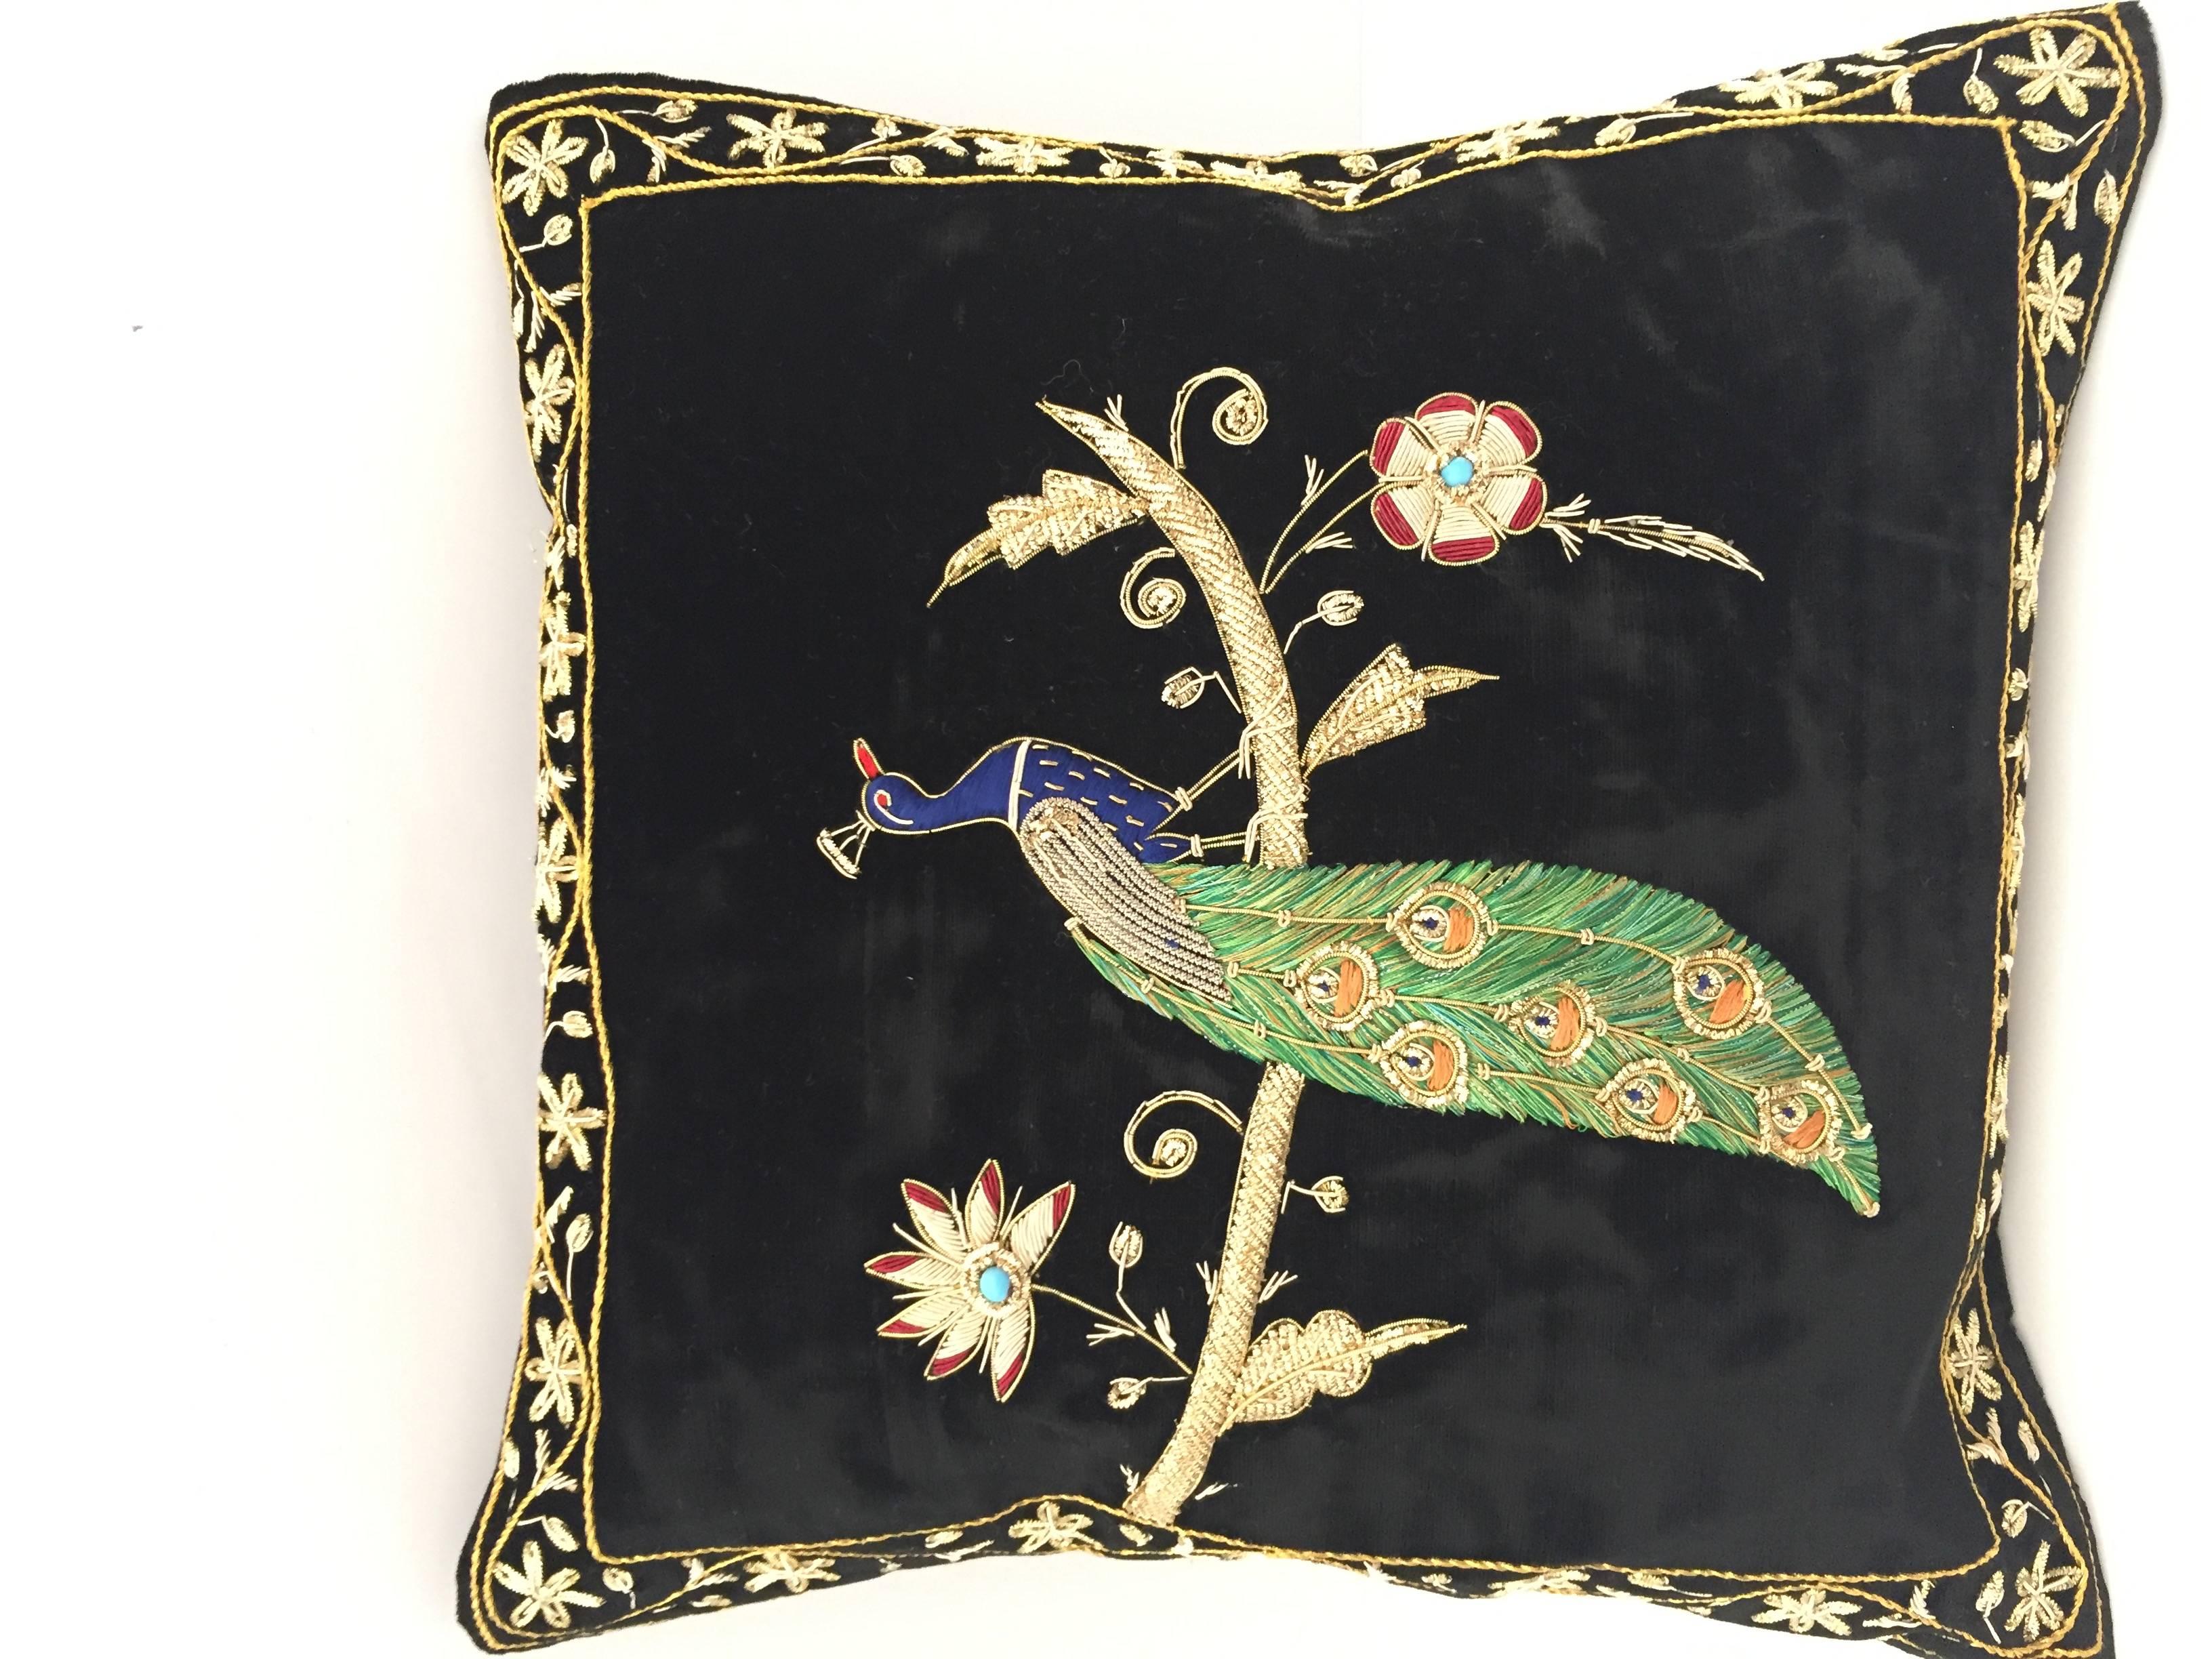 Black Velvet Silk Throw Pillow Embroidered with Gold Peacock Design 2